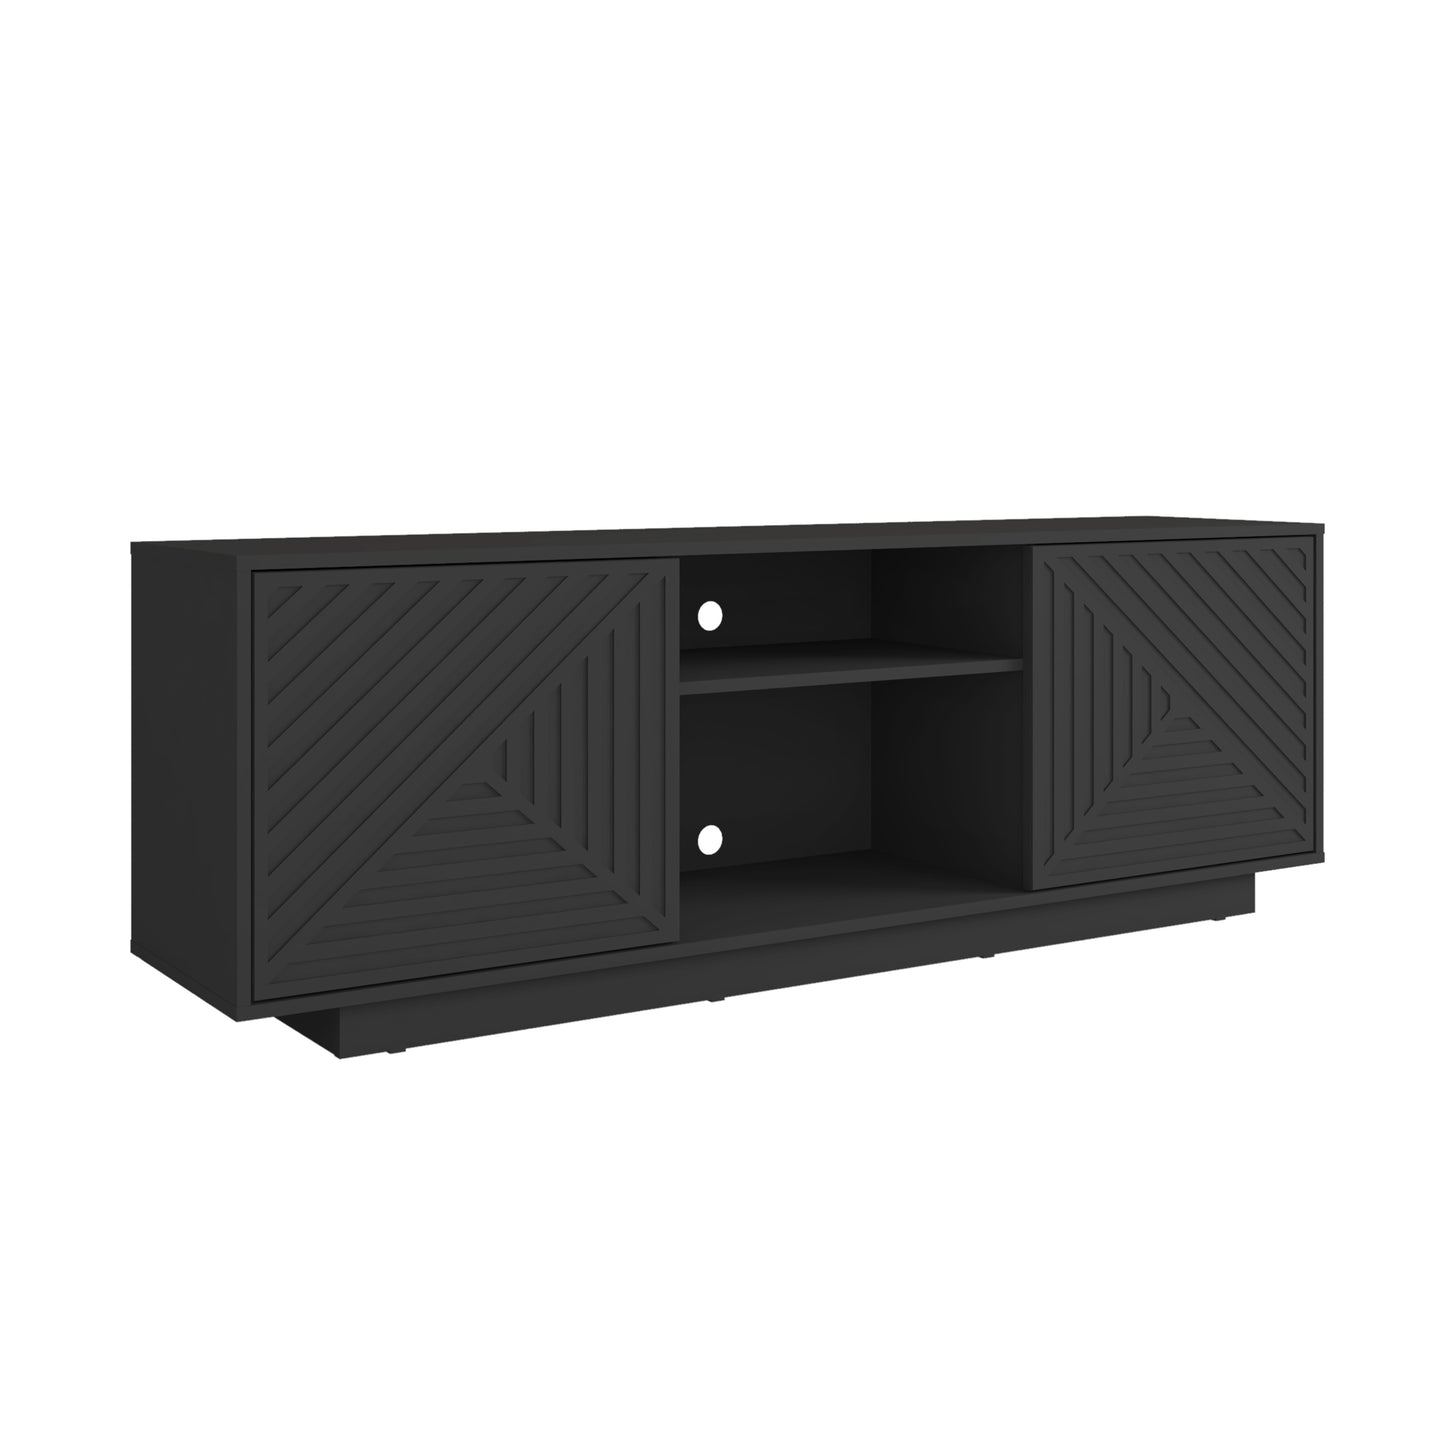 Techni Mobili Modern TV Stand for TVs Up to 70", Black